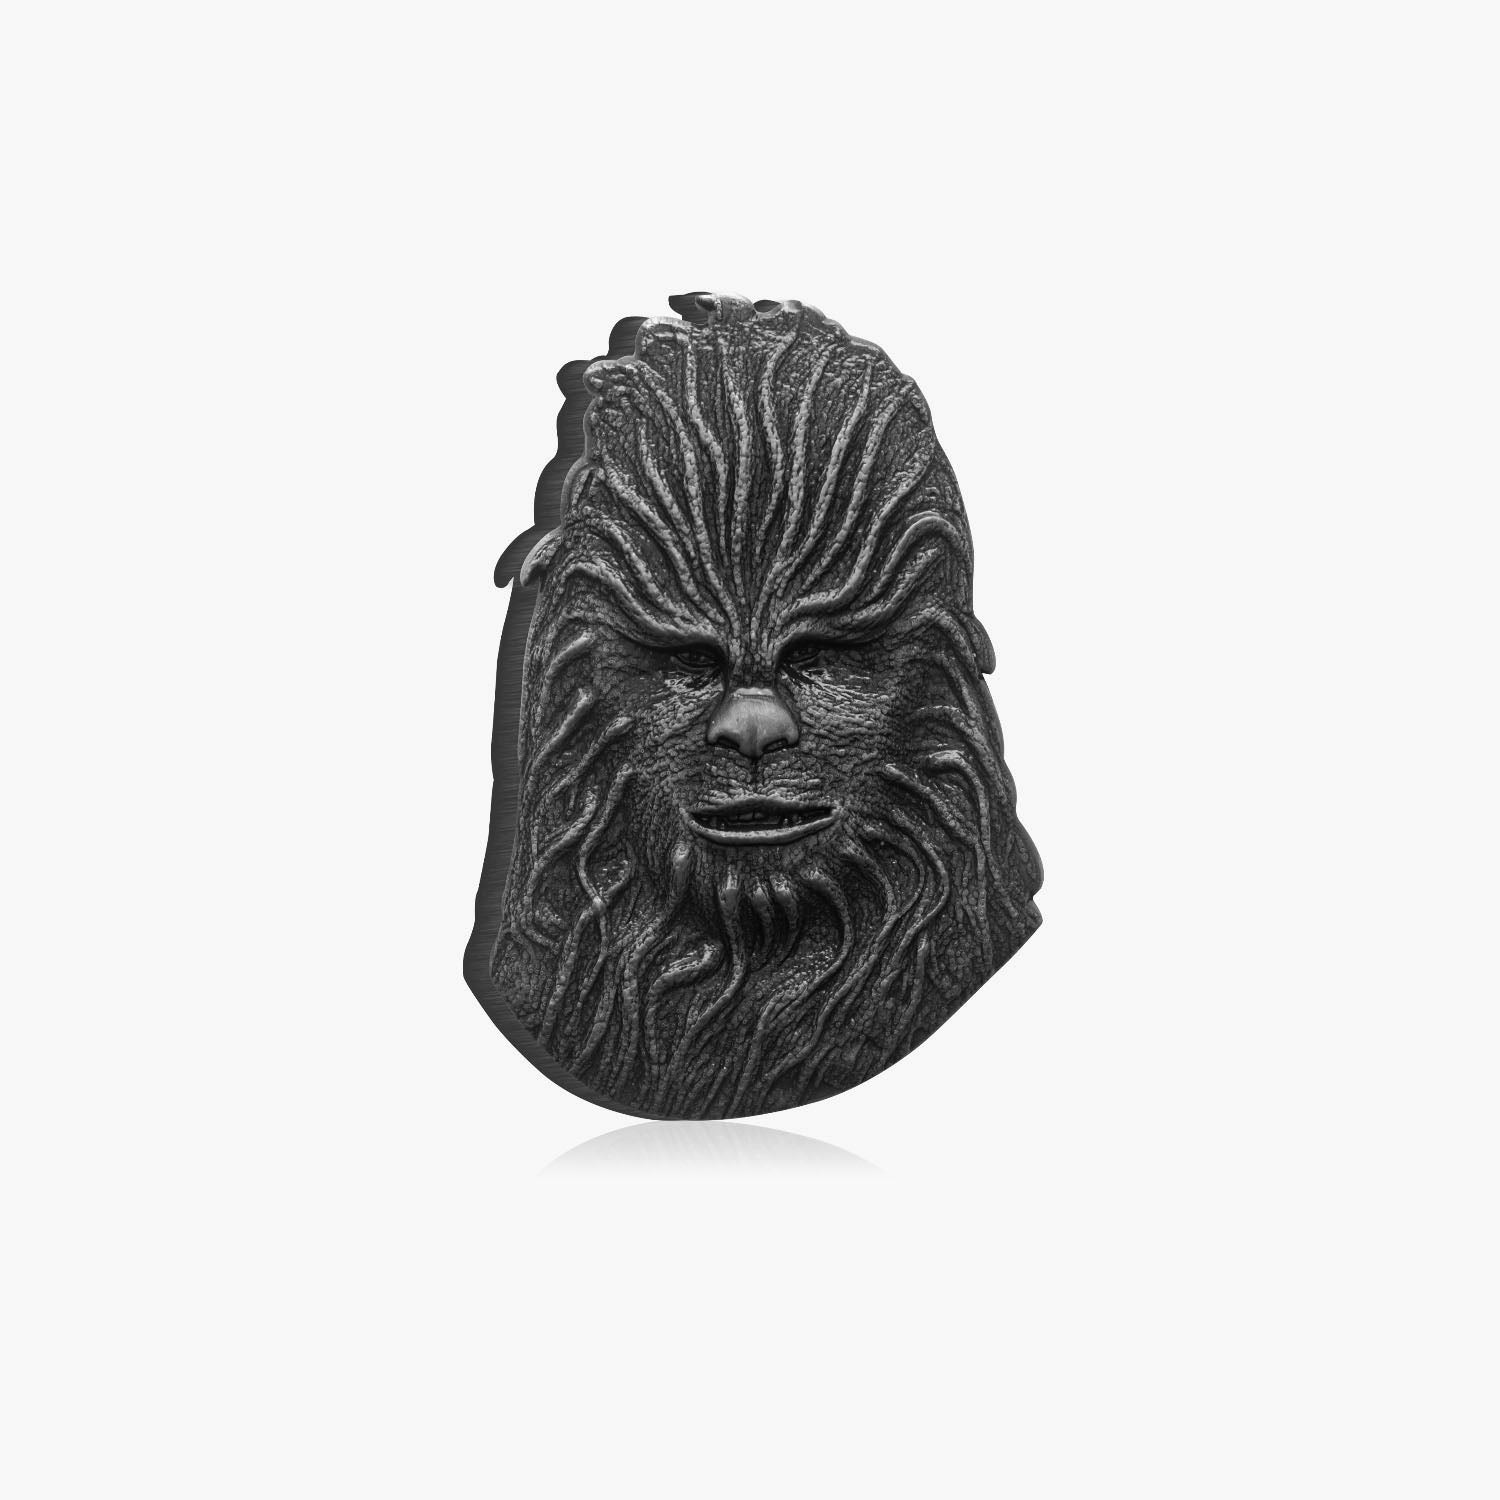 Official Star Wars Chewbacca Shaped Commemorative